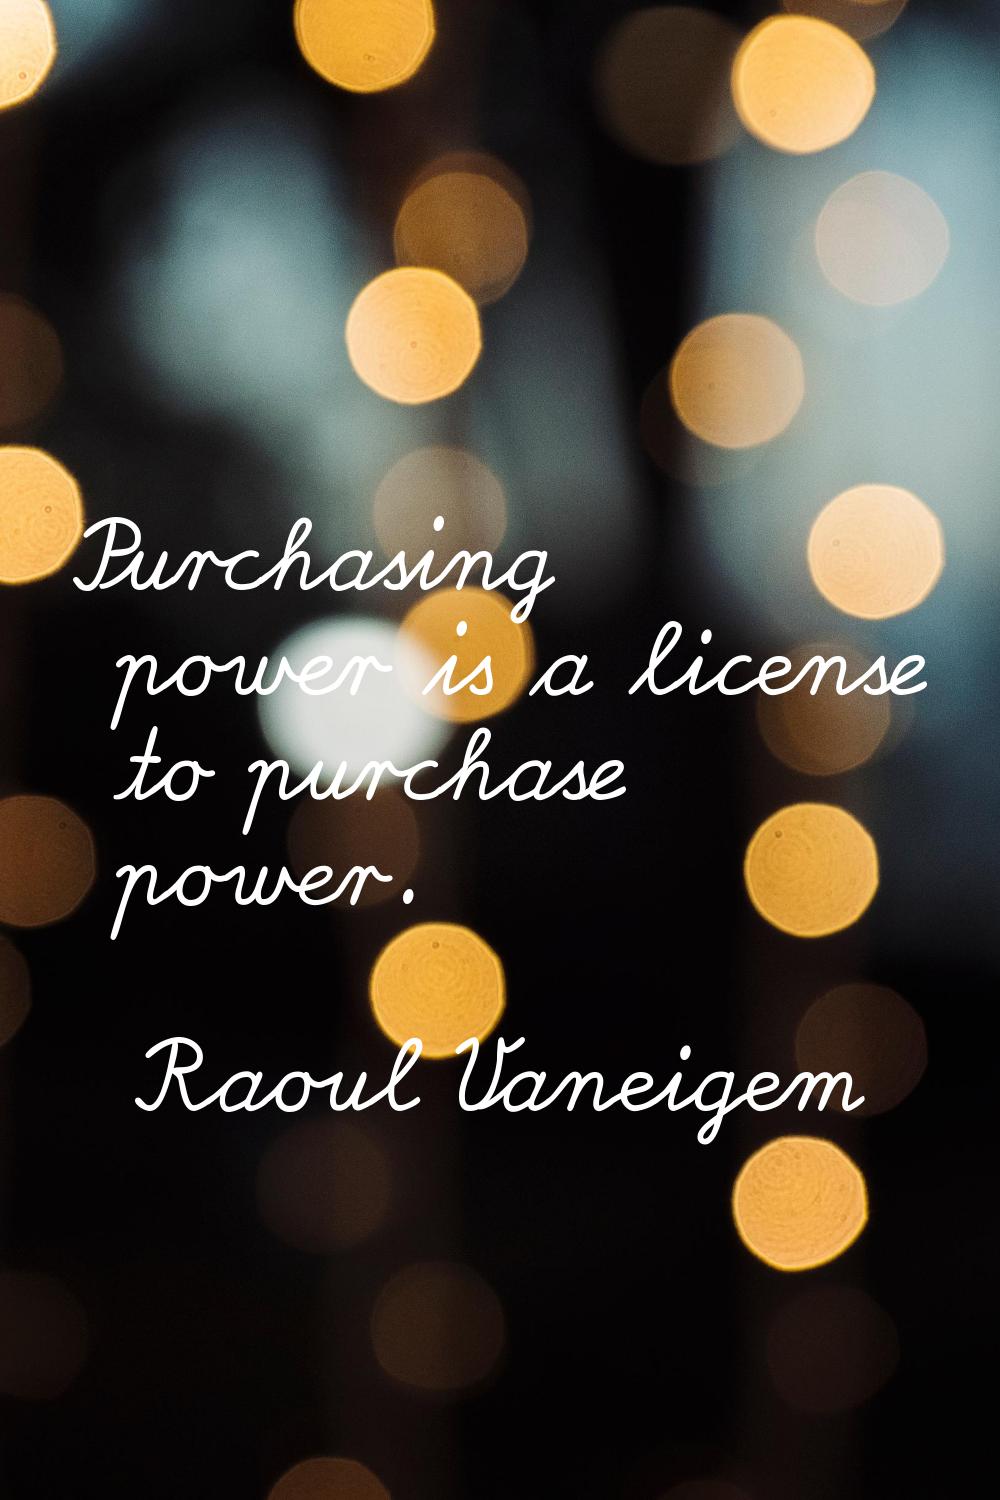 Purchasing power is a license to purchase power.